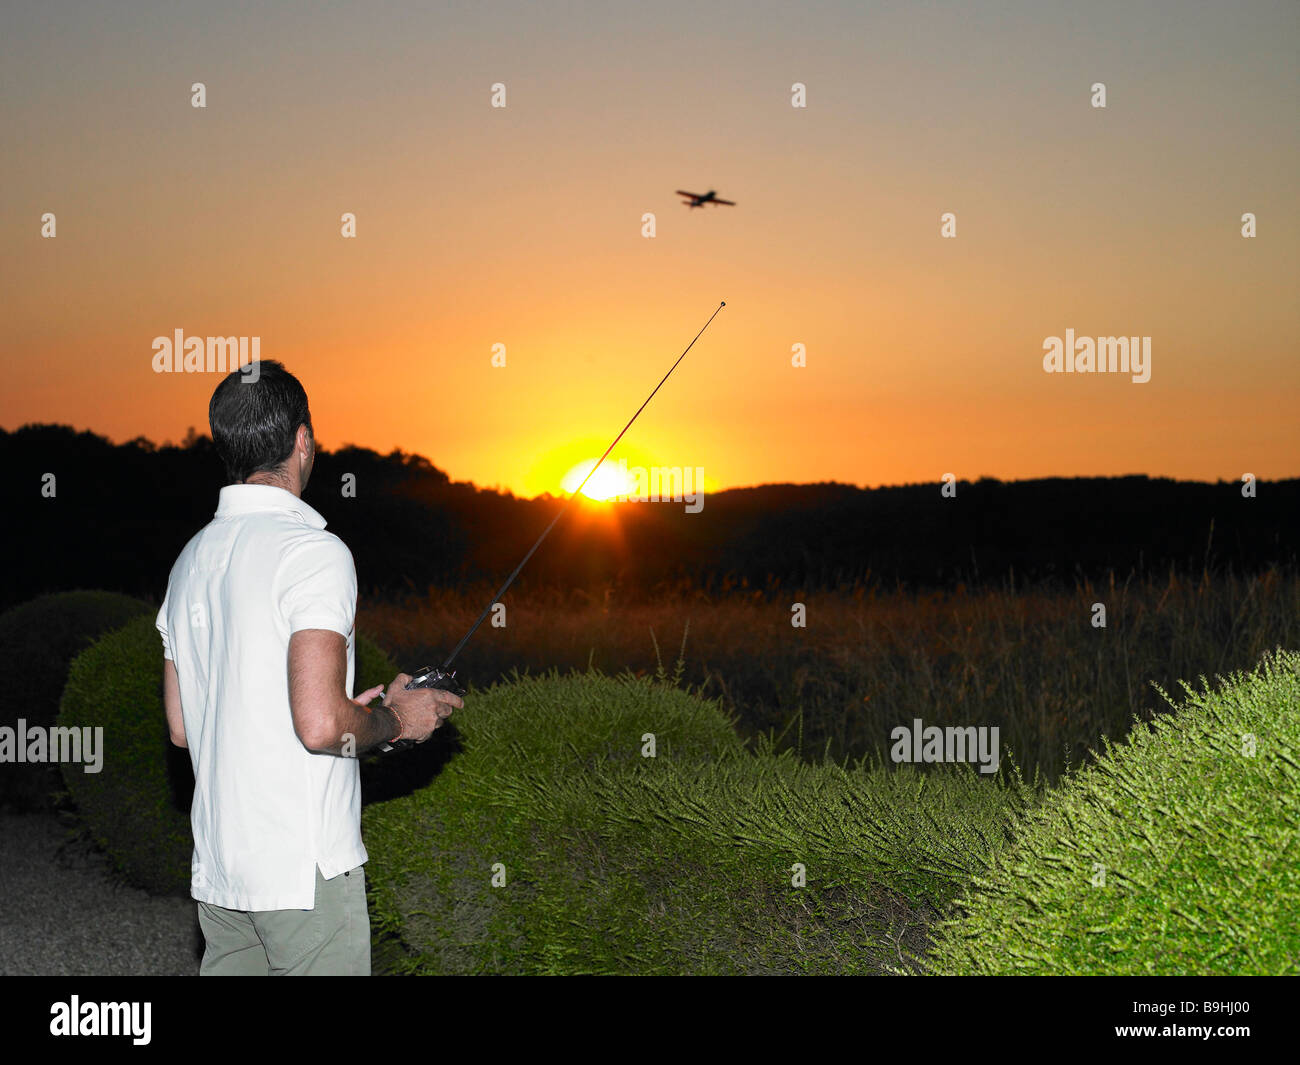 Man playing with remote-controlled plane Stock Photo